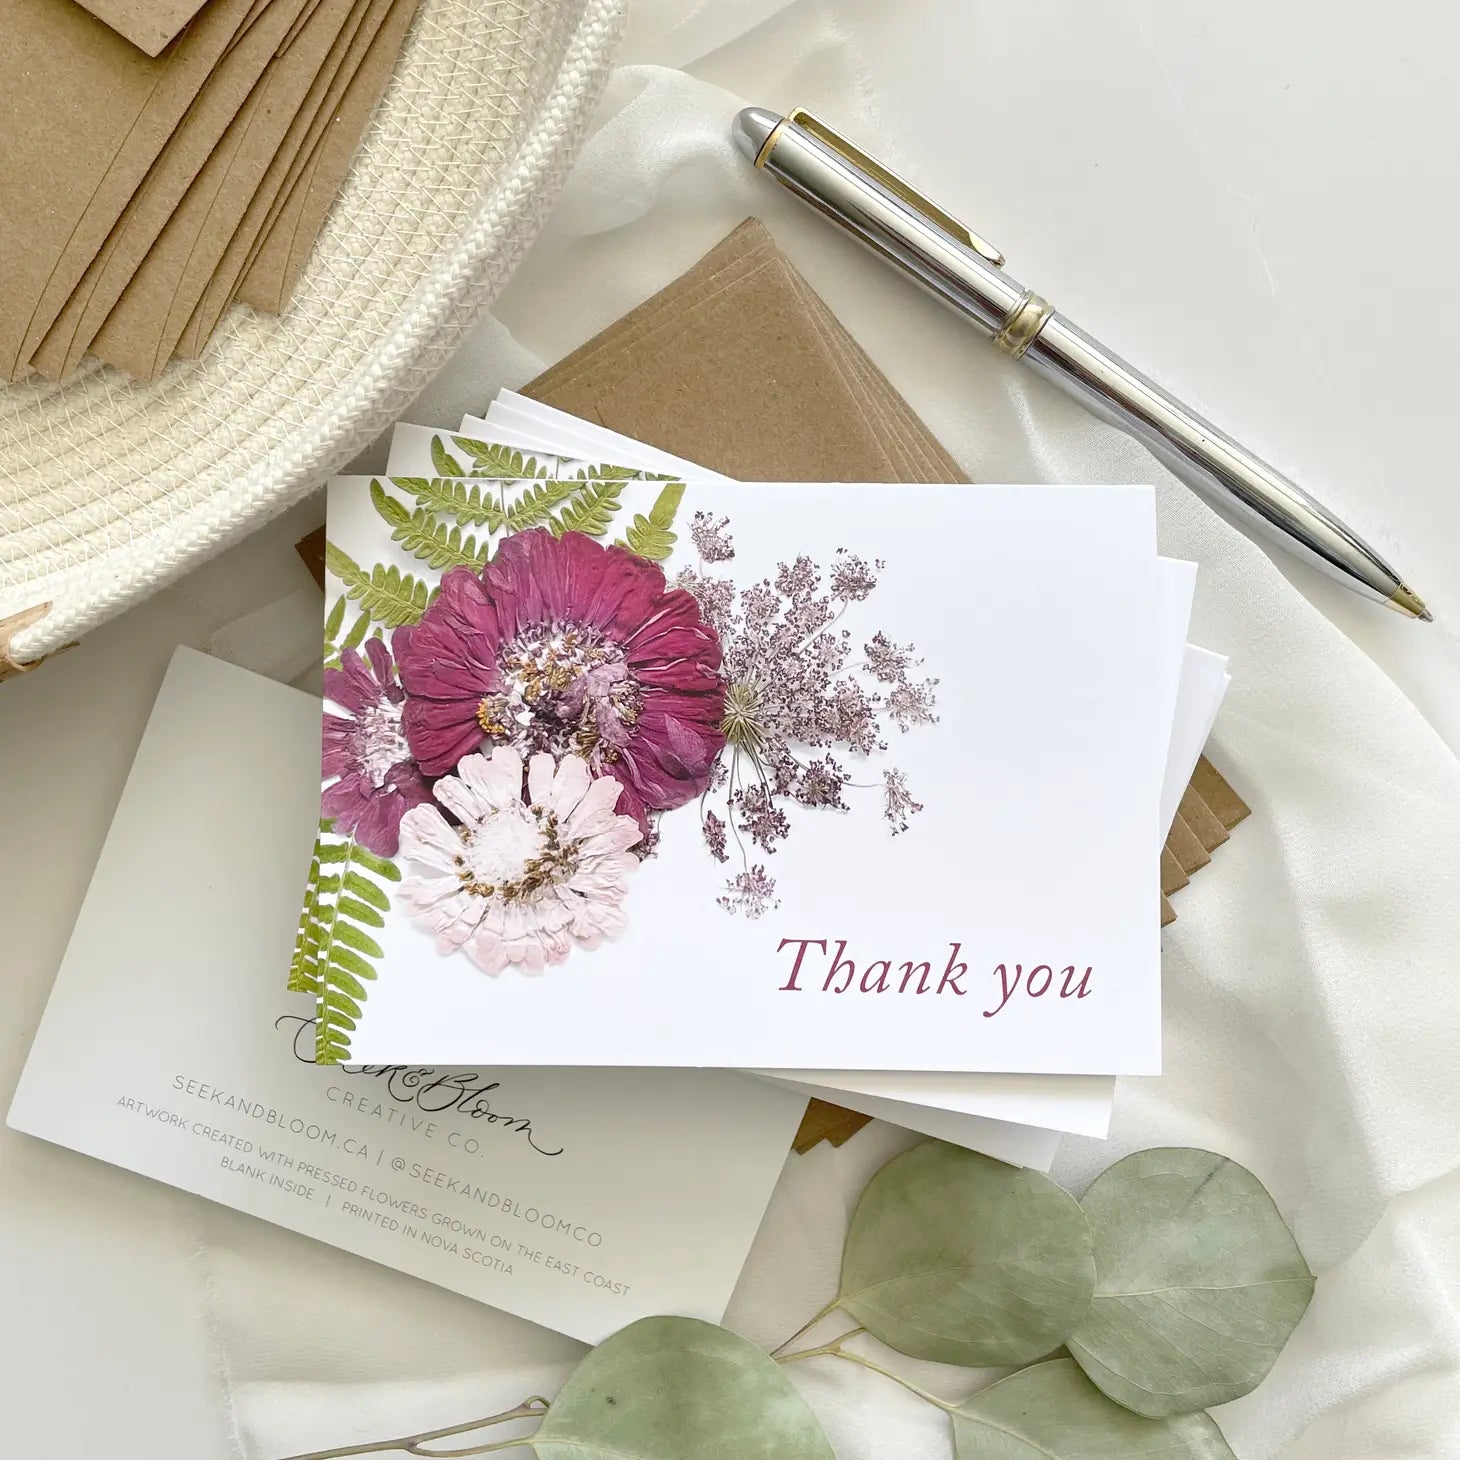 Seek & Bloom Boxed Notes - Zinnia Thank You